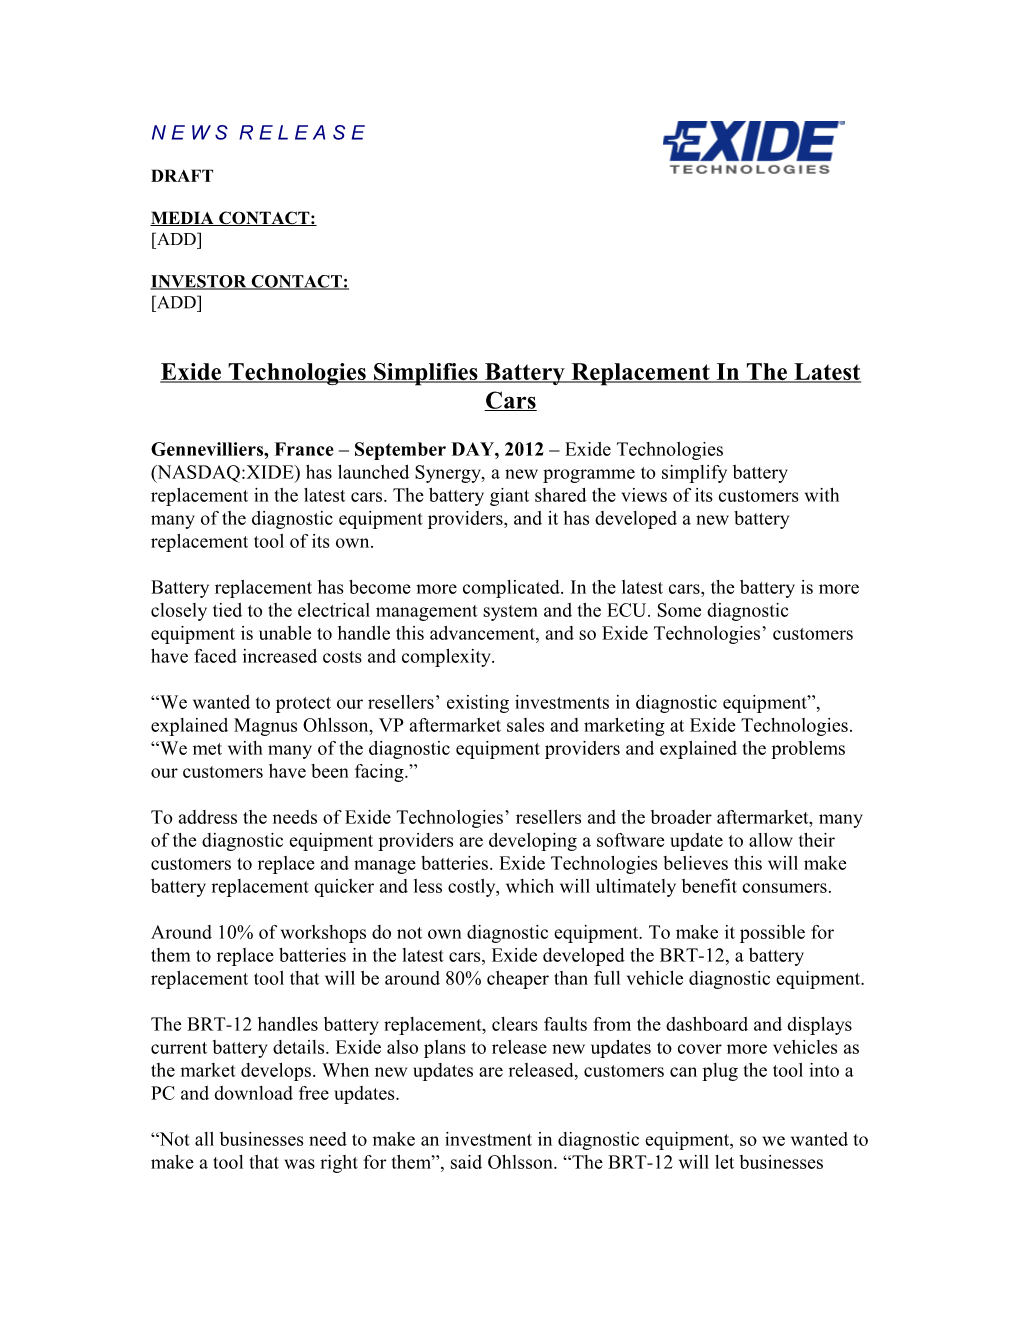 Exide Technologies Simplifies Battery Replacement in the Latest Cars